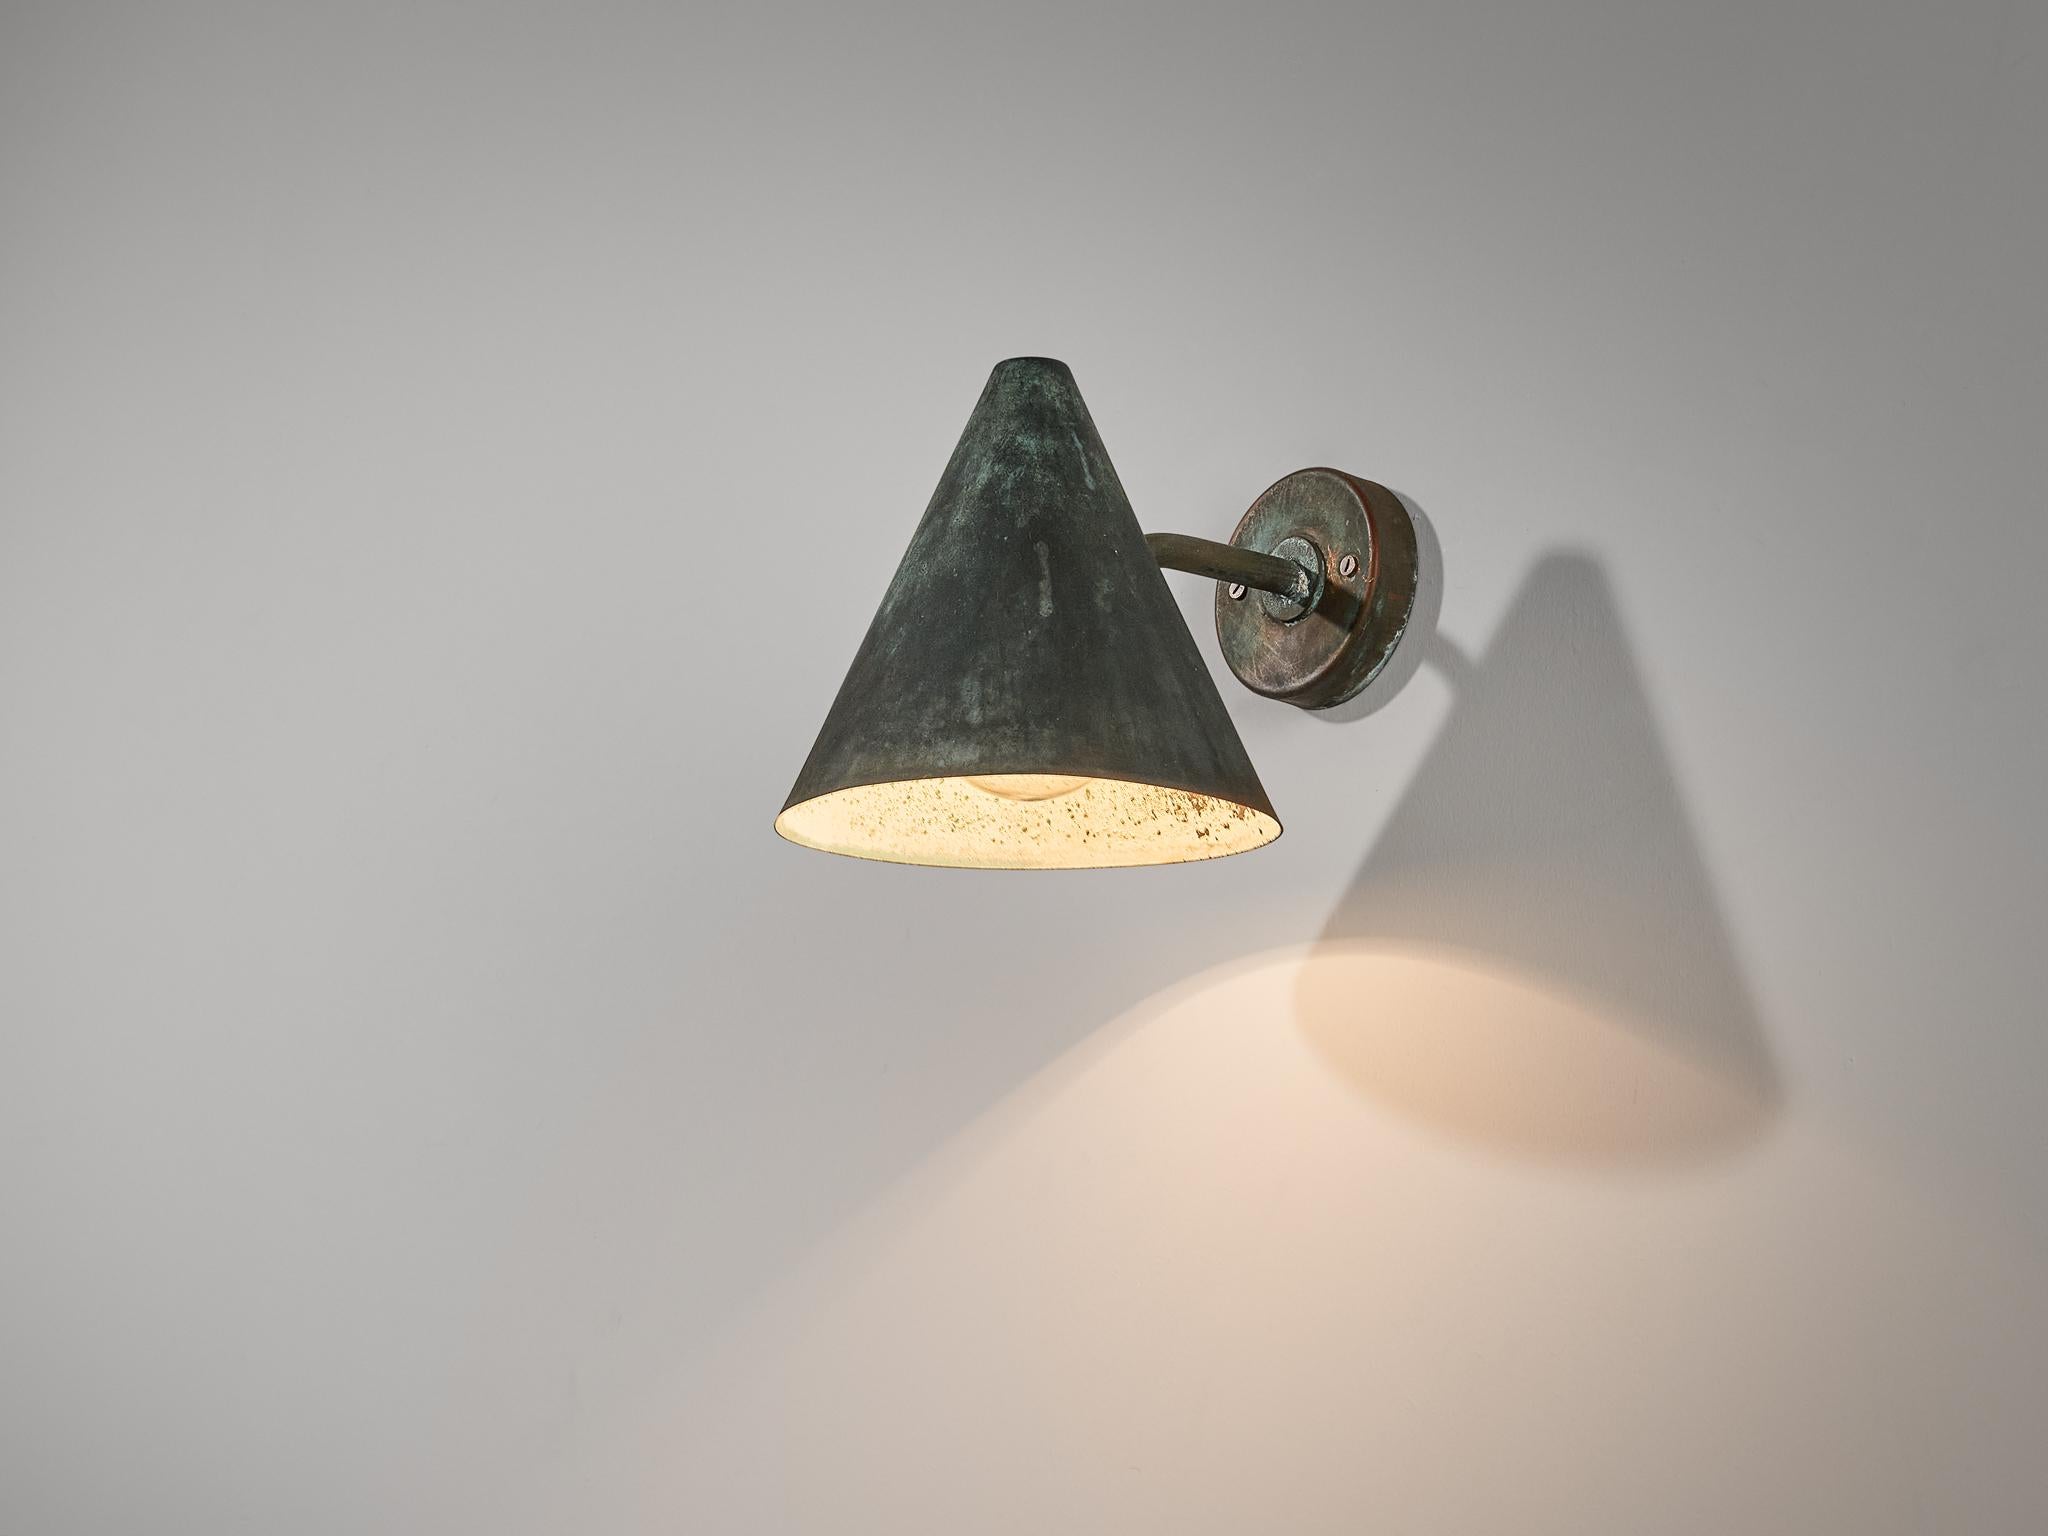 Hans-Agne Jakobsson for Hans-Agne Jakobsson AB in Markaryd, wall light ‘Tratten’, copper, Sweden, 1950s

Hans-Agne Jakobsson designed this wall light 'Tratten', which is crafted from green copper. The conical-shaped shade is secured to a slightly